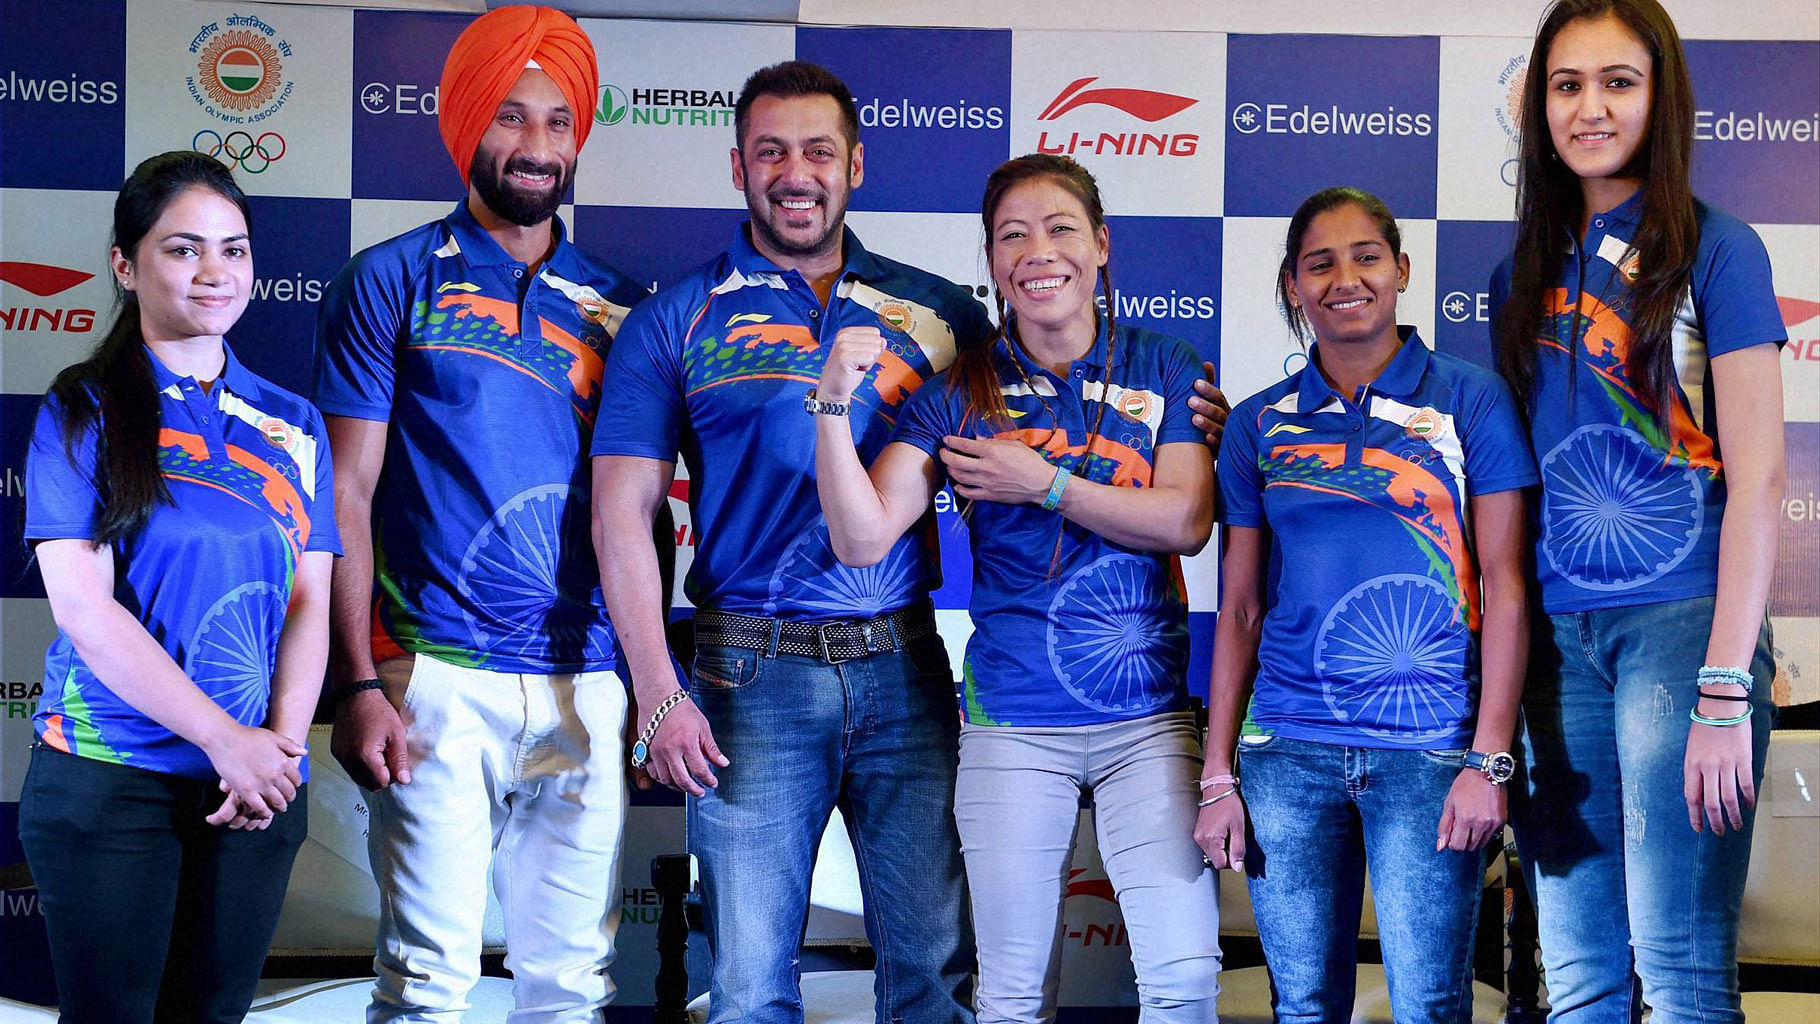 Salman Khan with Indian athletes ahead of Rio Olympics. (Photo: Twitter)